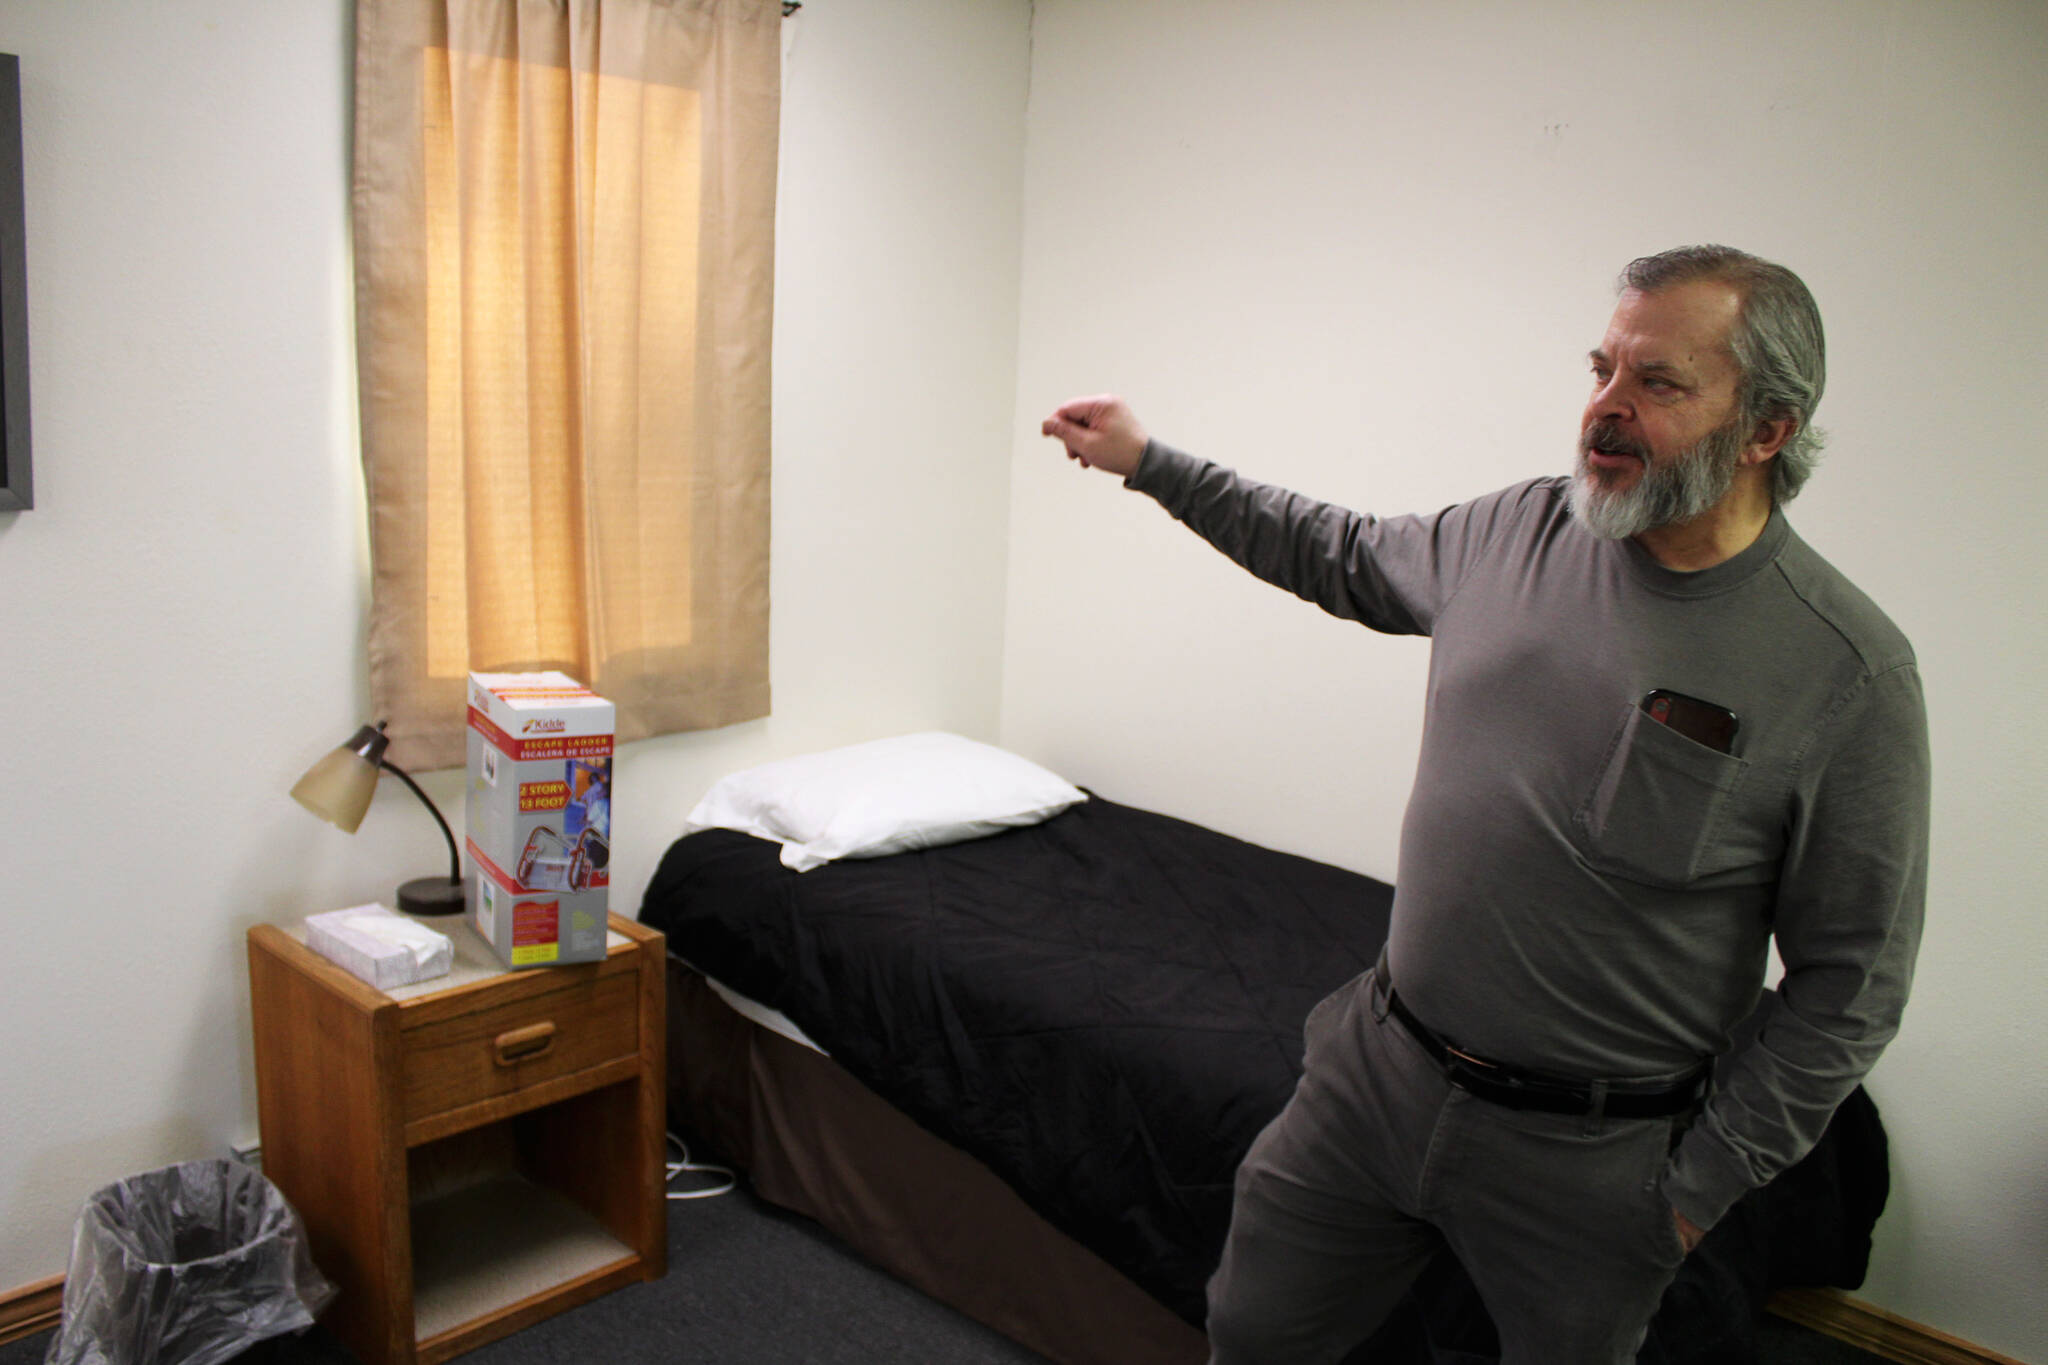 Tim Navarre, president of the Kenai Peninsula Foundation, stands in a bedroom at a cold weather shelter set to open next month on Monday, Nov. 22, 2021 in Nikiski, Alaska. (Ashlyn O’Hara/Peninsula Clarion)